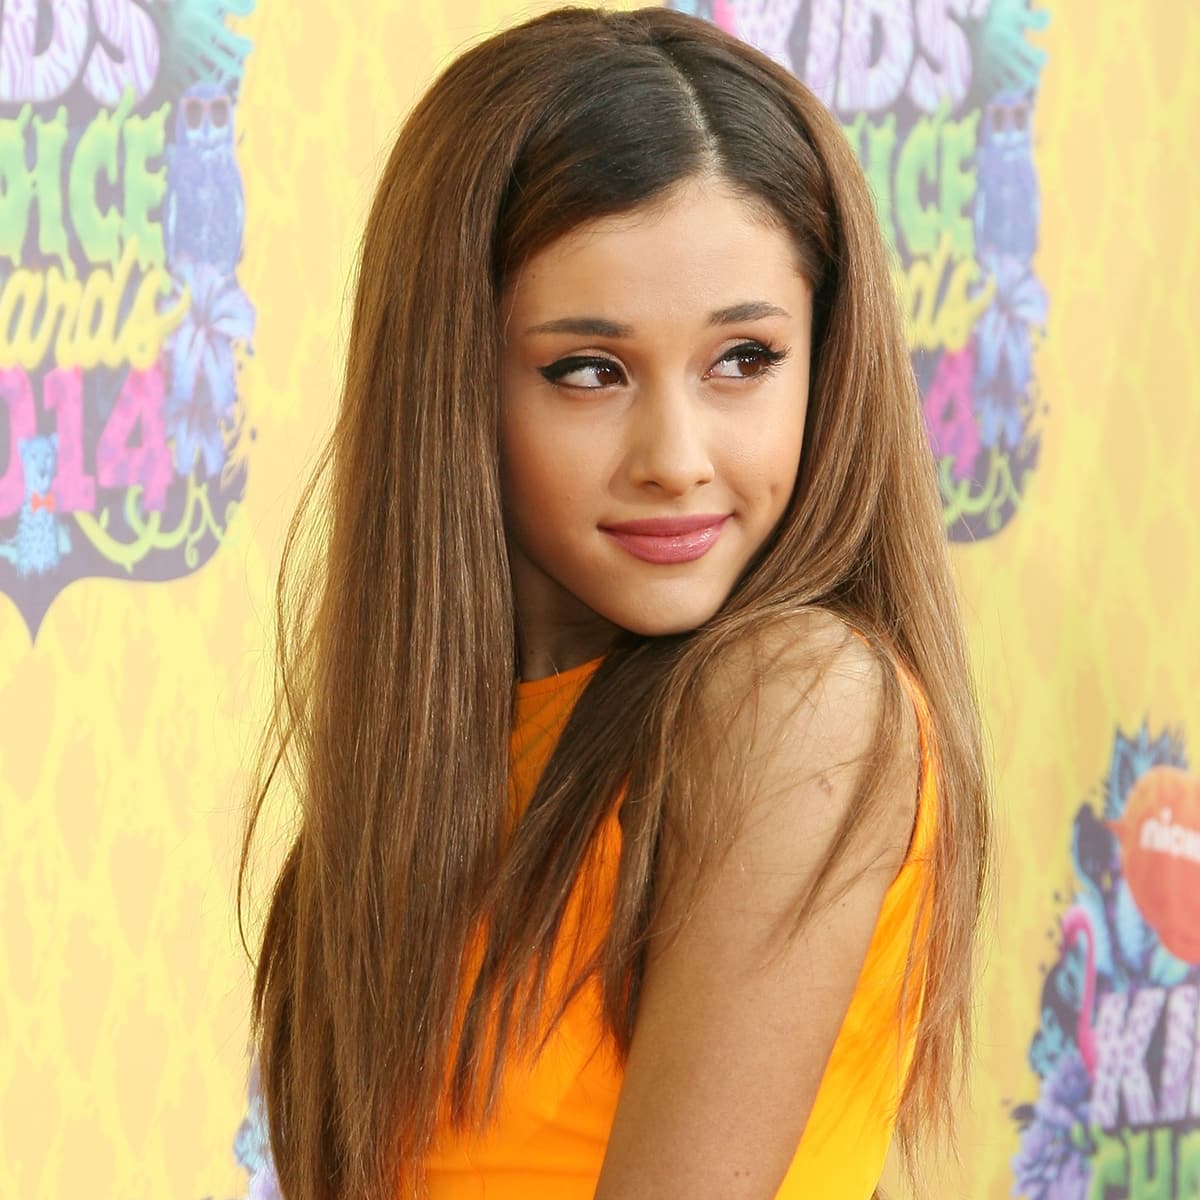 Ariana Grande is one of the hottest female singers on the planet